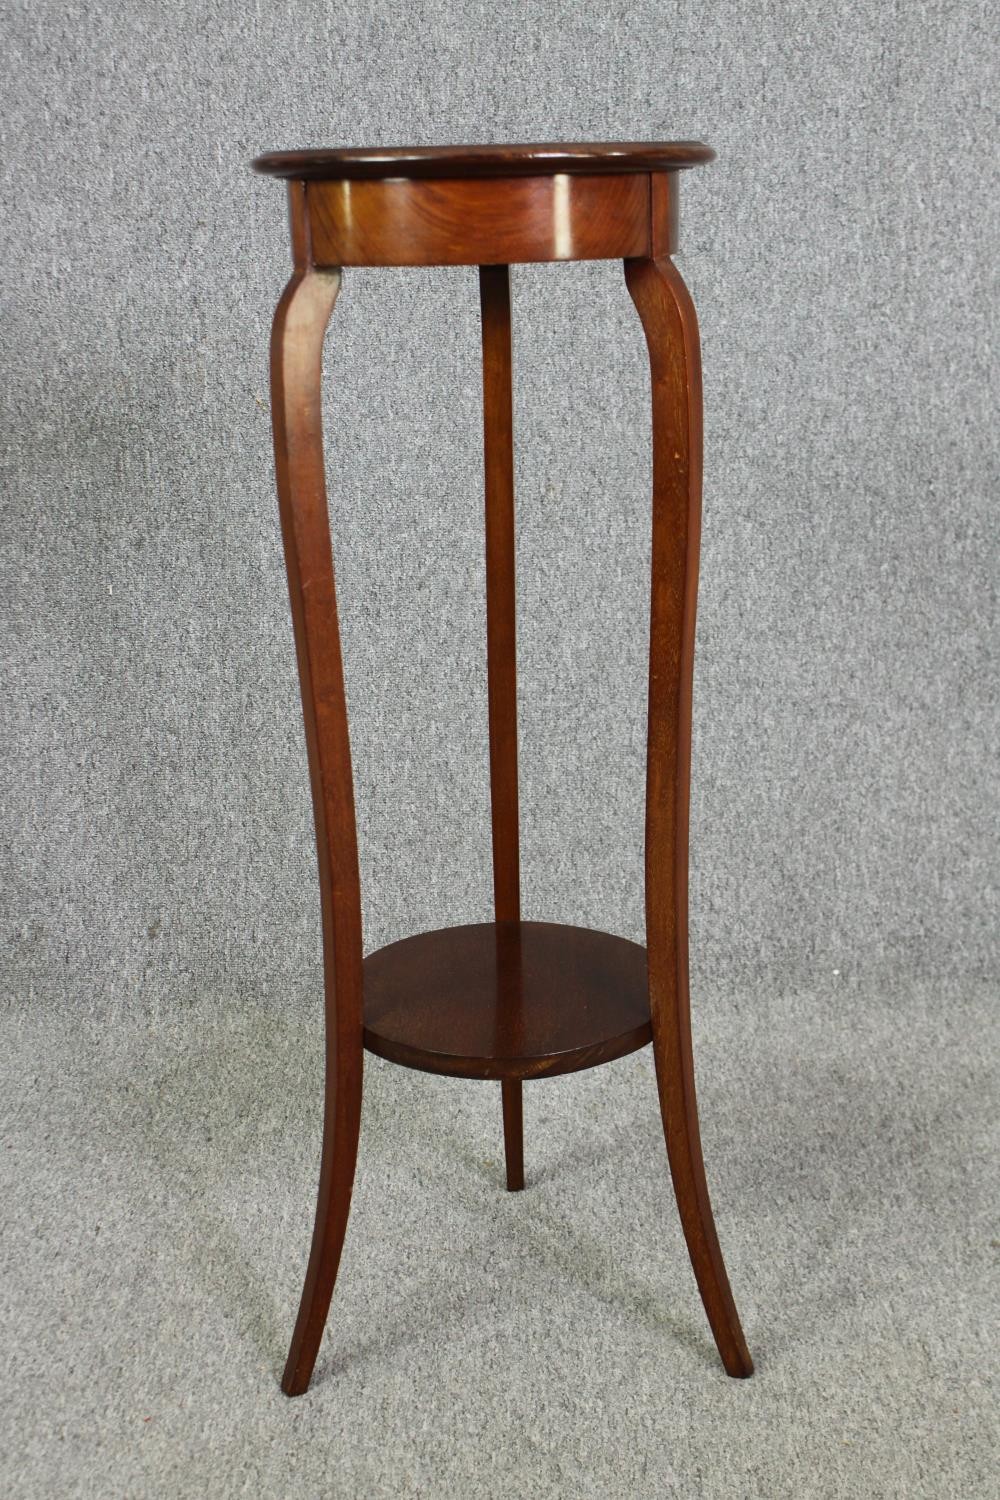 Jardiniere stand, late 19th century mahogany. H.95cm. - Image 3 of 4